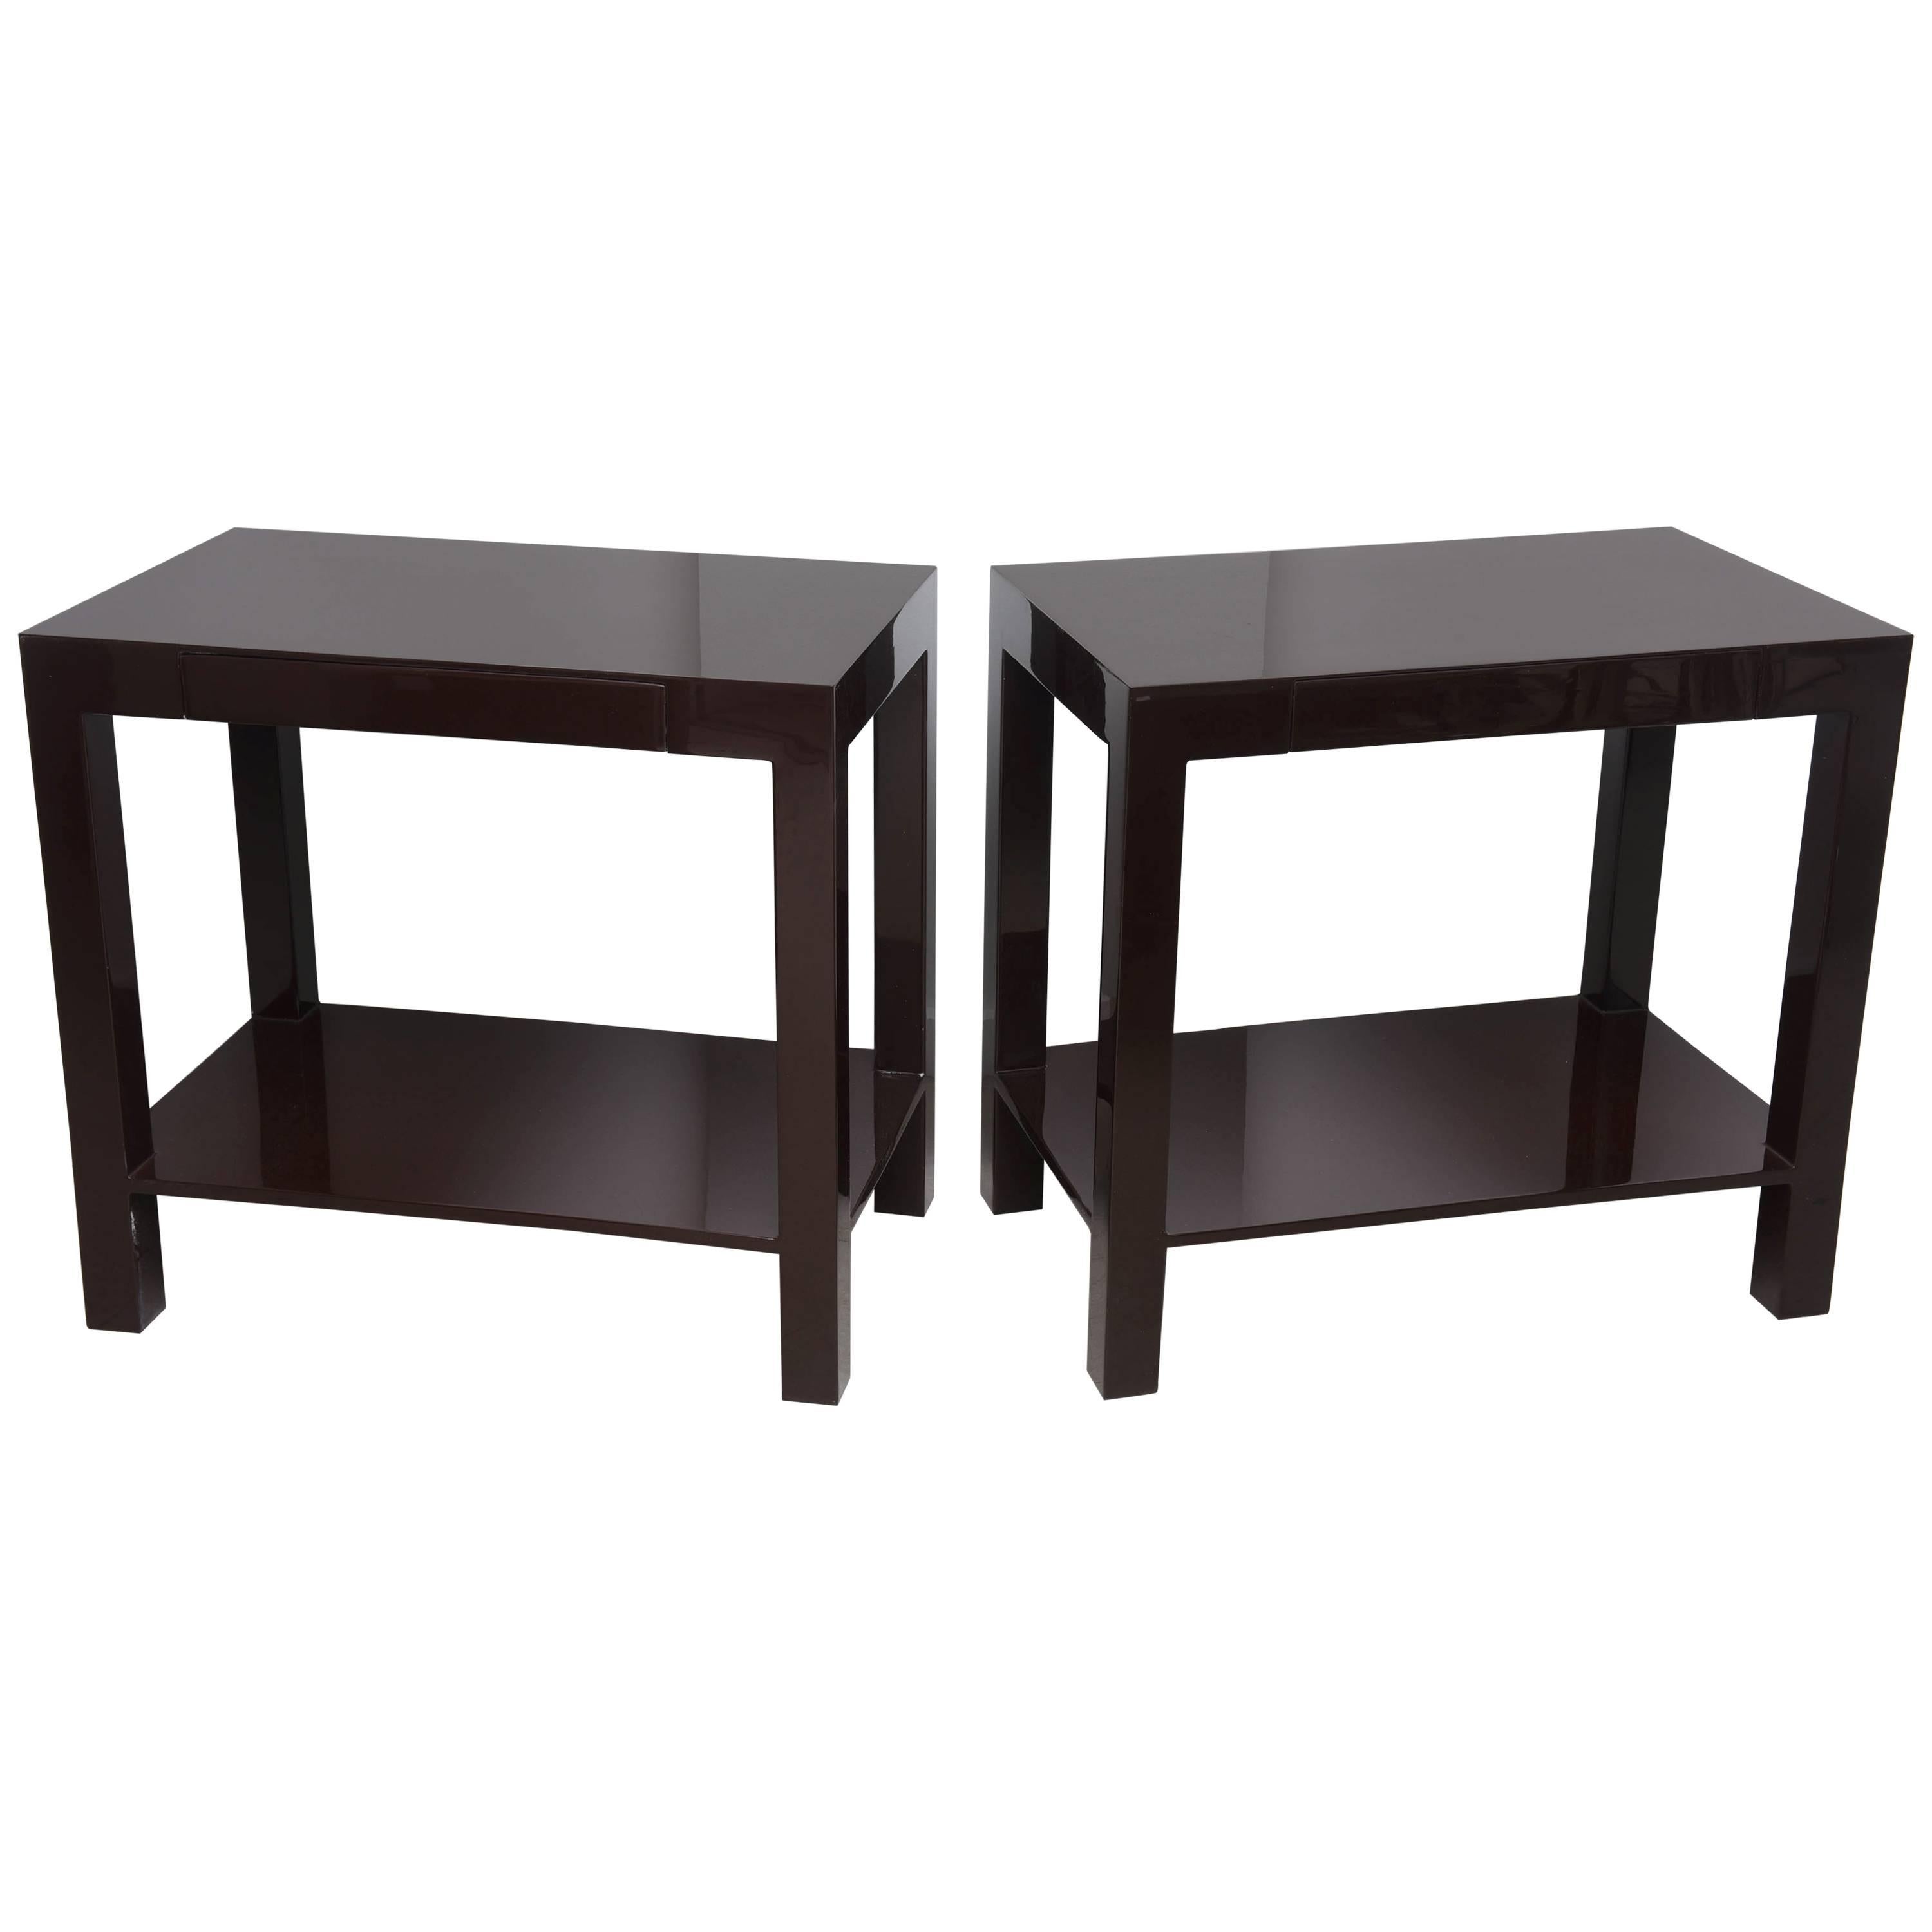 Pair of Italian Chocolate Brown Lacquer Tables